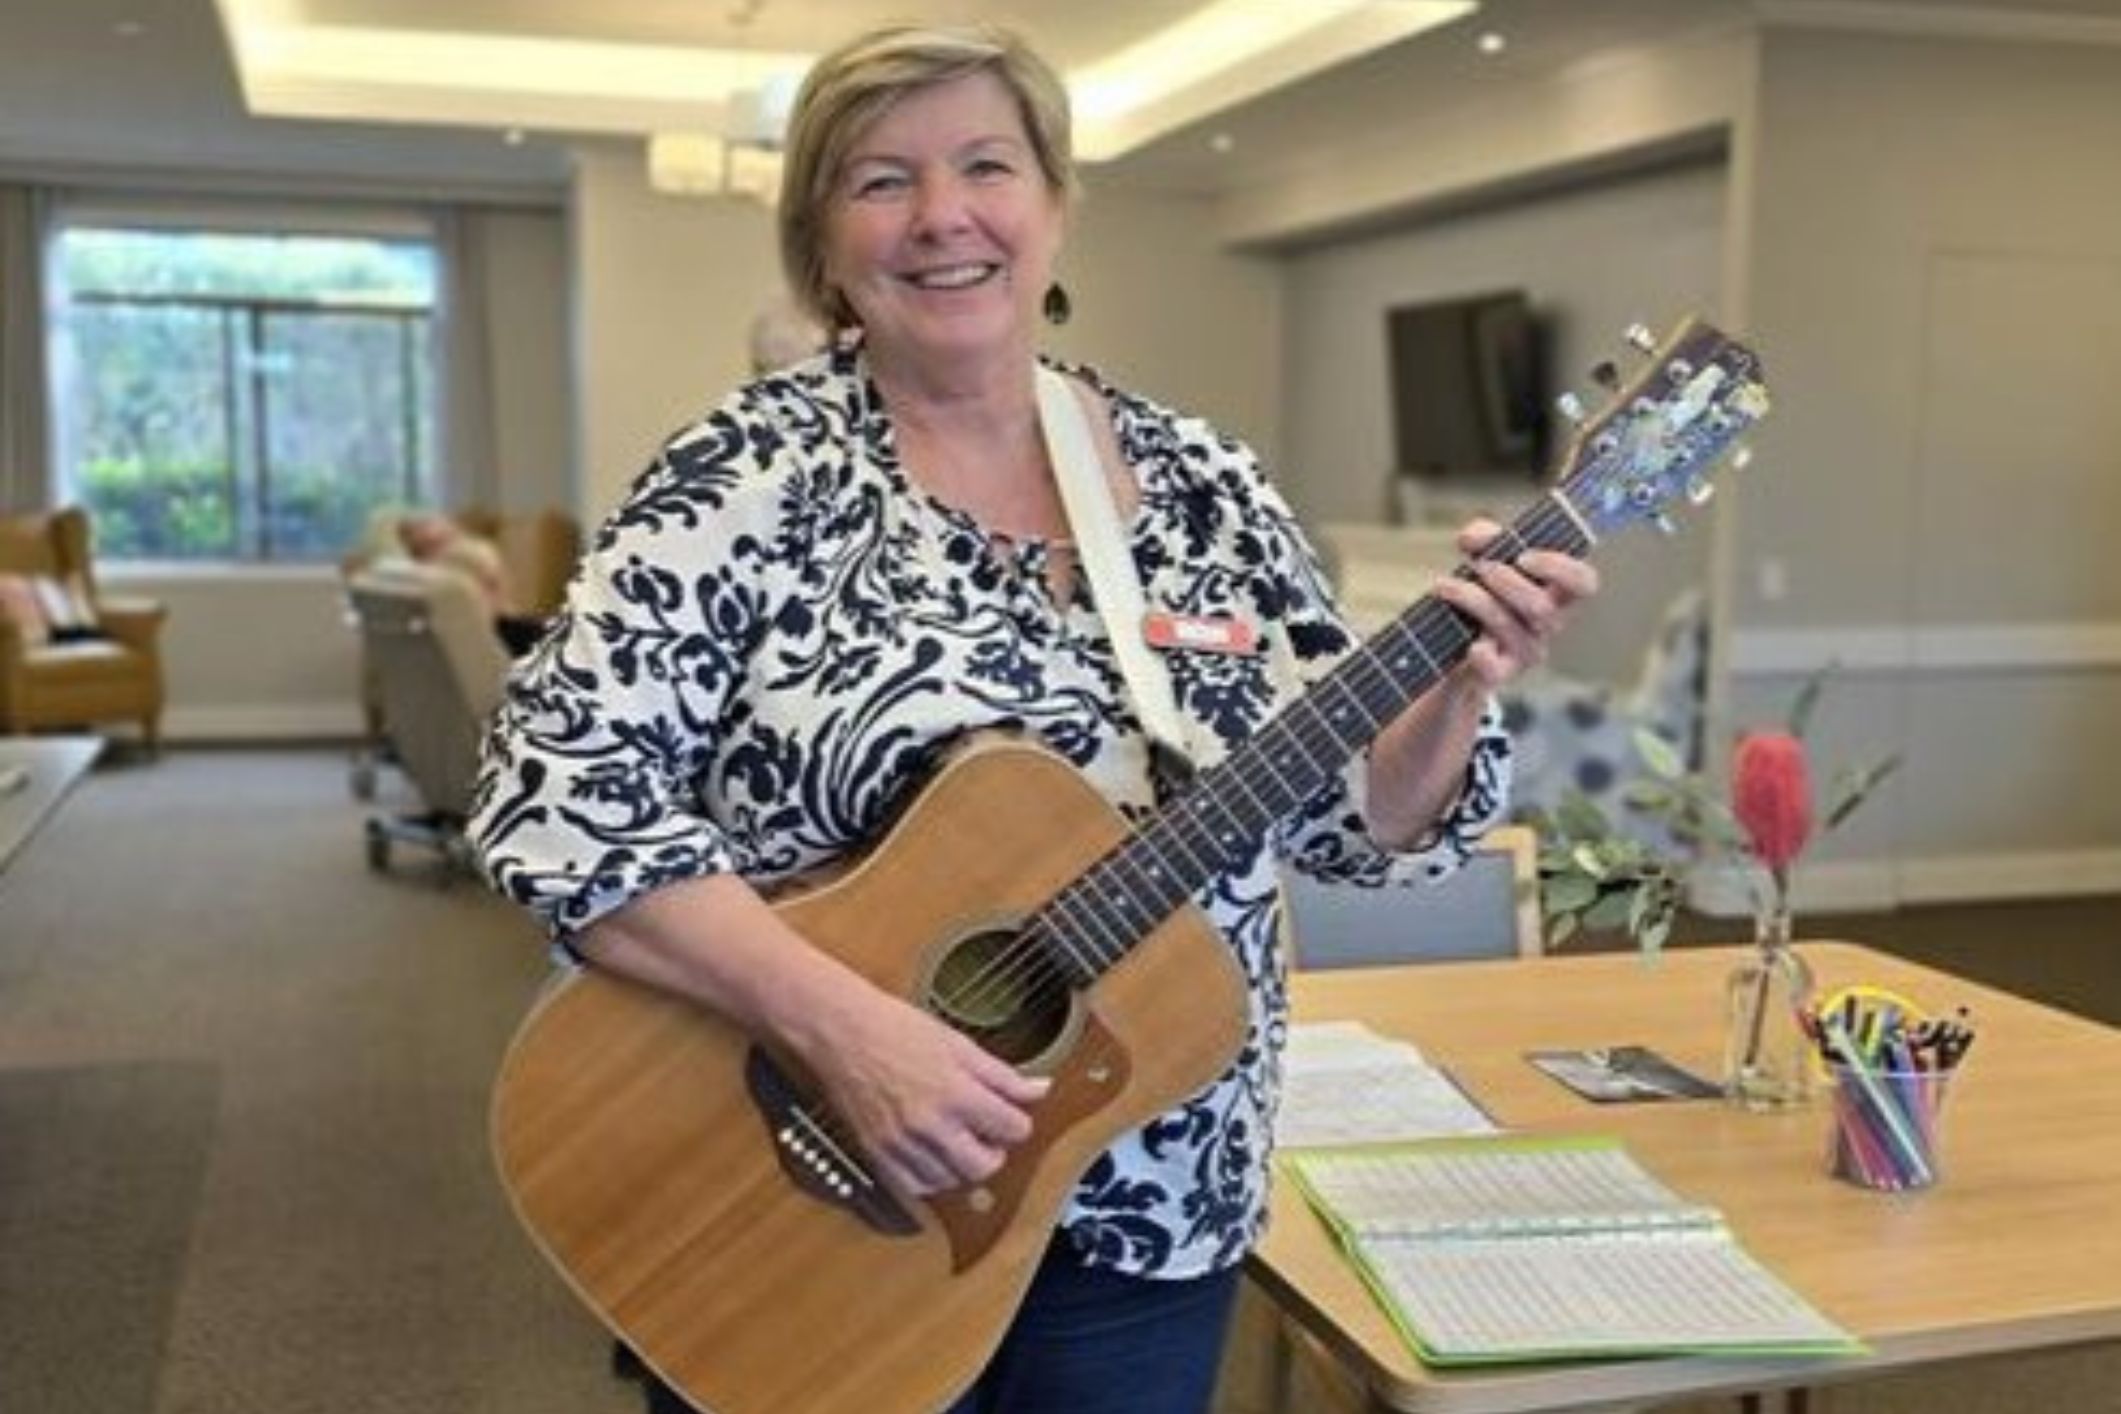 Volunteer Di and her guitar brining joy for people with very severe symptoms of dementia